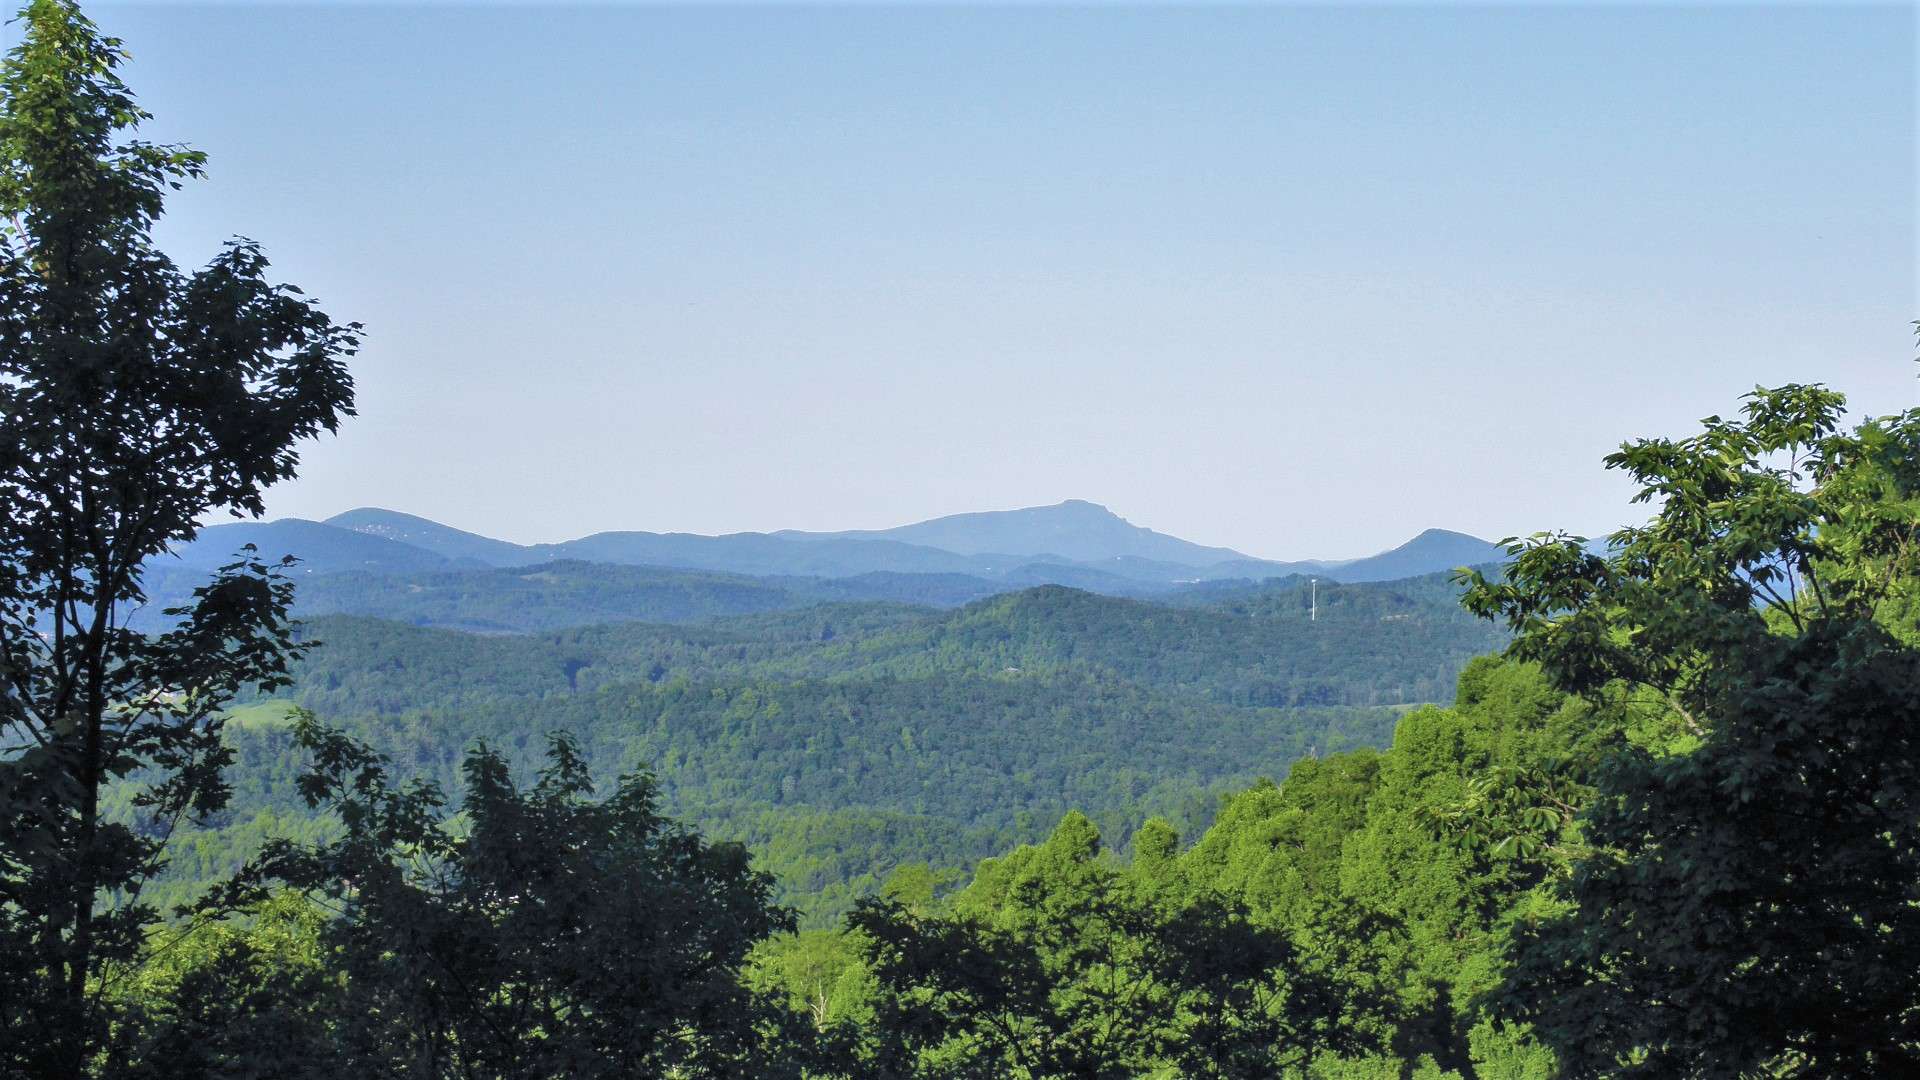 Offered at $133,000, this gorgeous 4 acre tract is located conveniently to Boone or West Jefferson allowing for the ideal location for your NC Mountain retreat or primary residence. B288